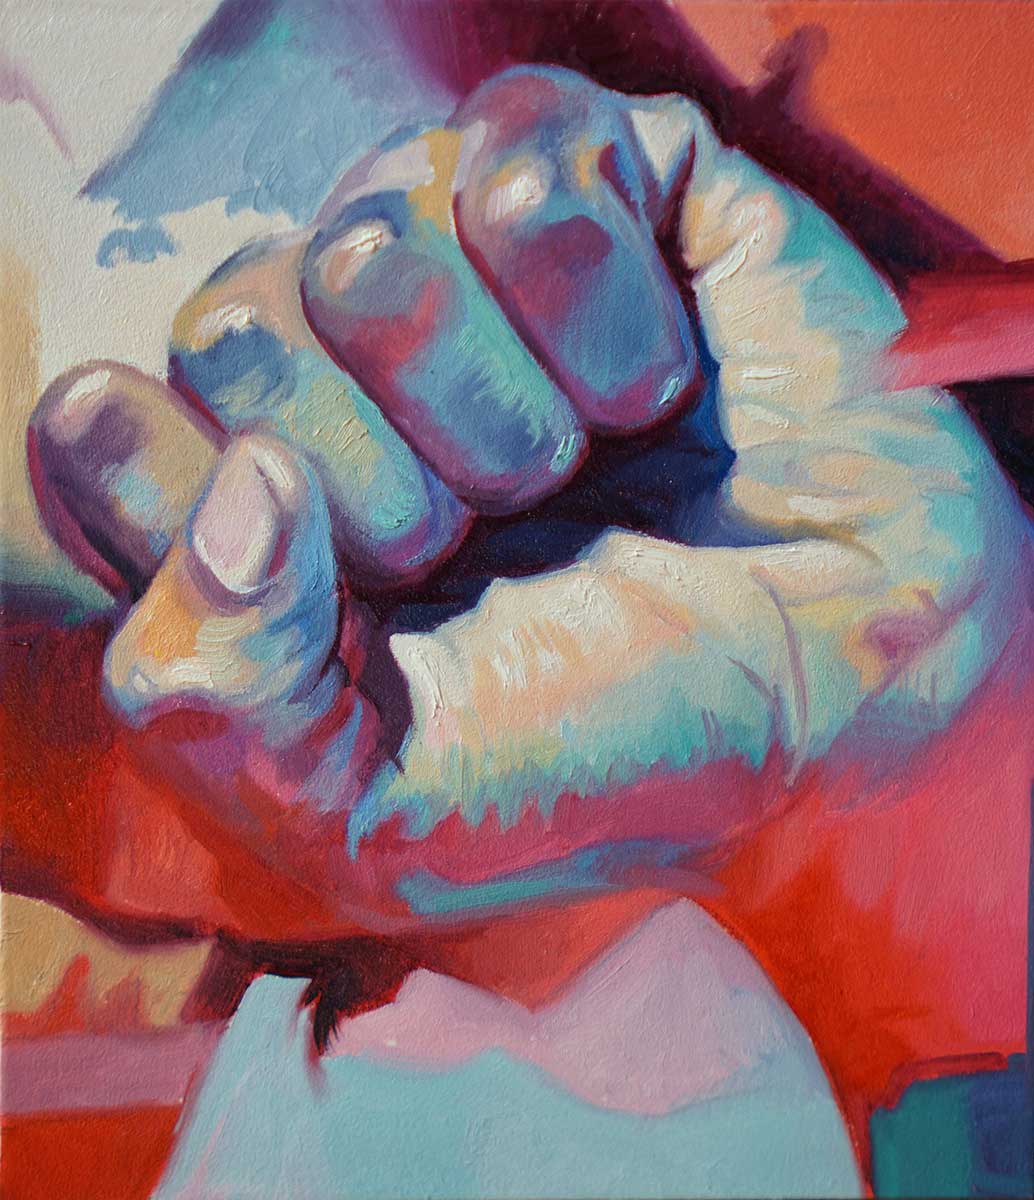 A colorful painting of a hand in a gesture of a hand in protest, solidarity or defiance.